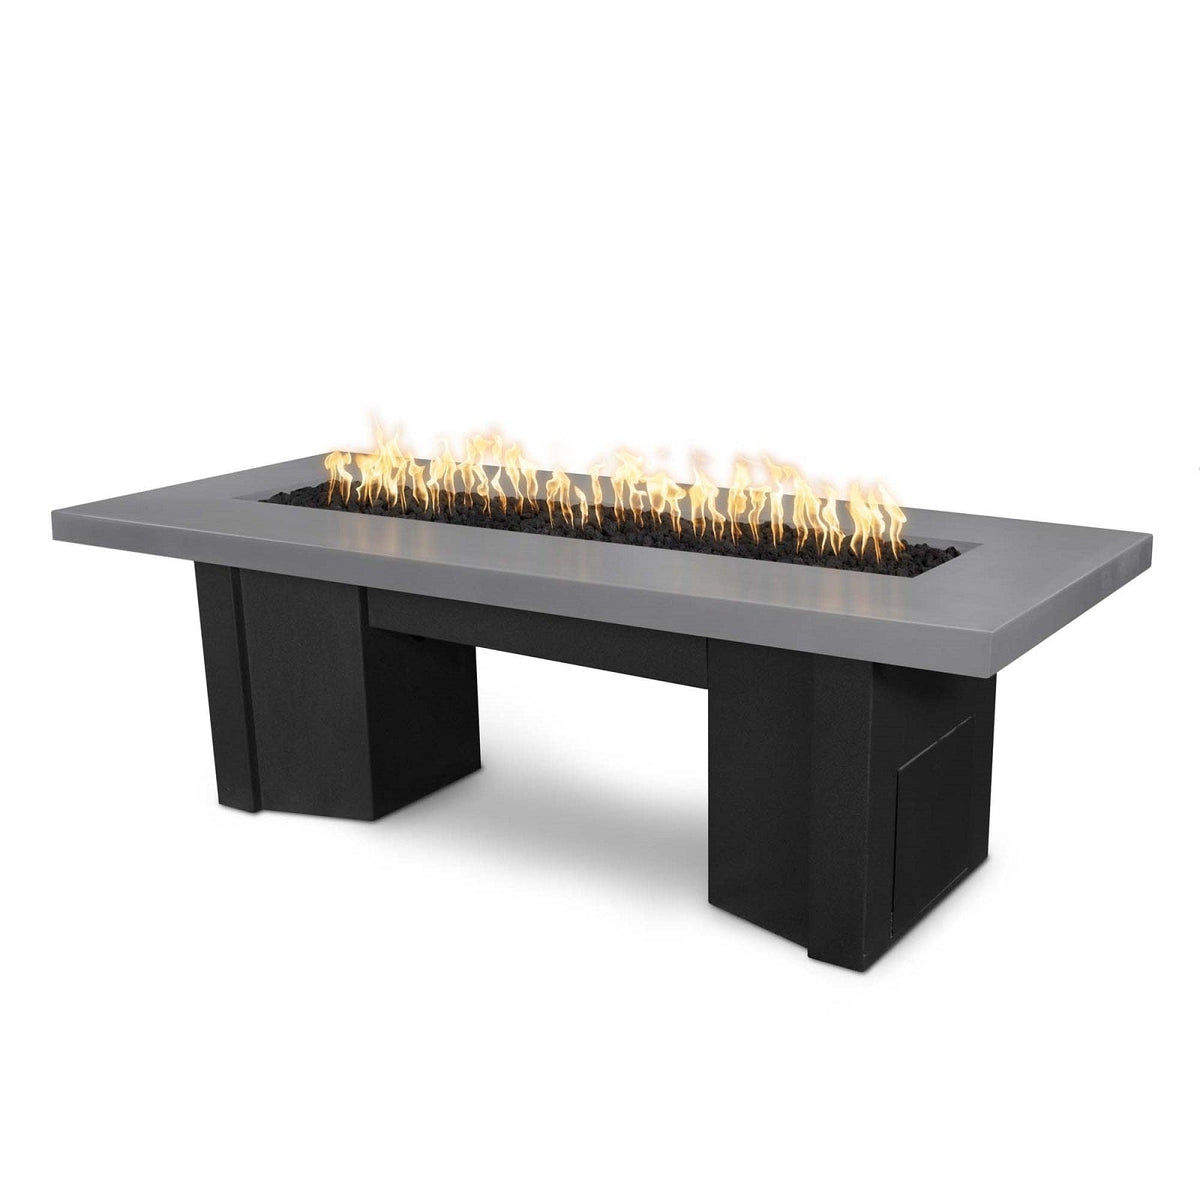 The Outdoor Plus Fire Features Natural Gray (-NGY) / Black Powder Coated Steel (-BLK) The Outdoor Plus 60&quot; Alameda Fire Table Smooth Concrete in Liquid Propane - 110V Plug &amp; Play Electronic Ignition / OPT-ALMGFRC60EKIT-LP